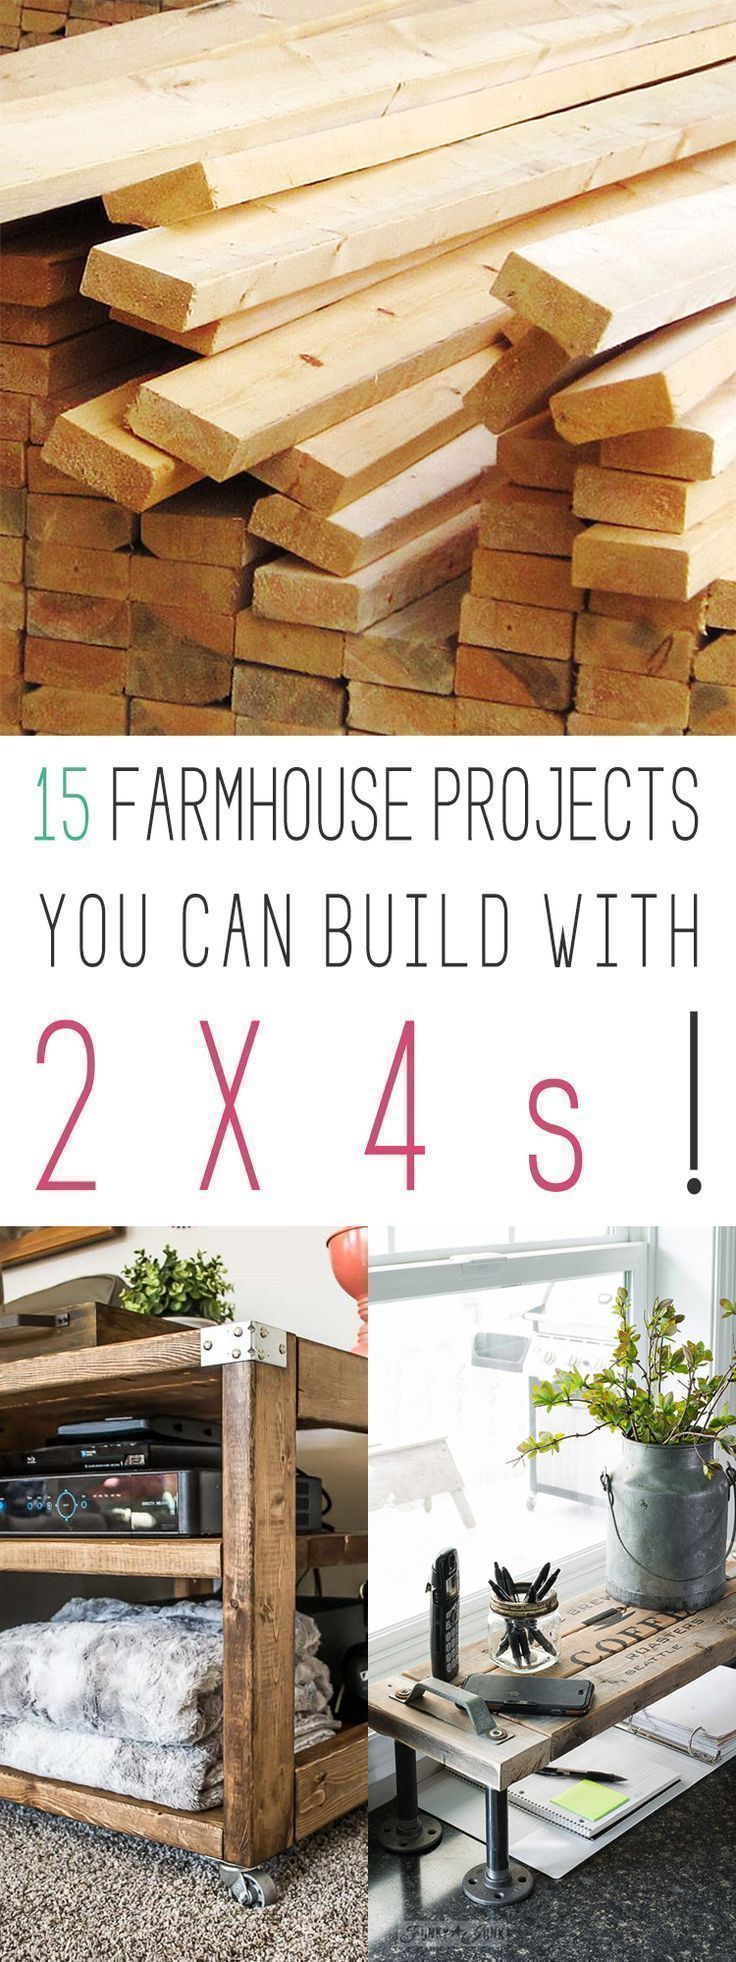 15 Farmhouse Projects You Can Build With 2X4s - The Cottage Market -   19 diy projects Decoration side tables ideas